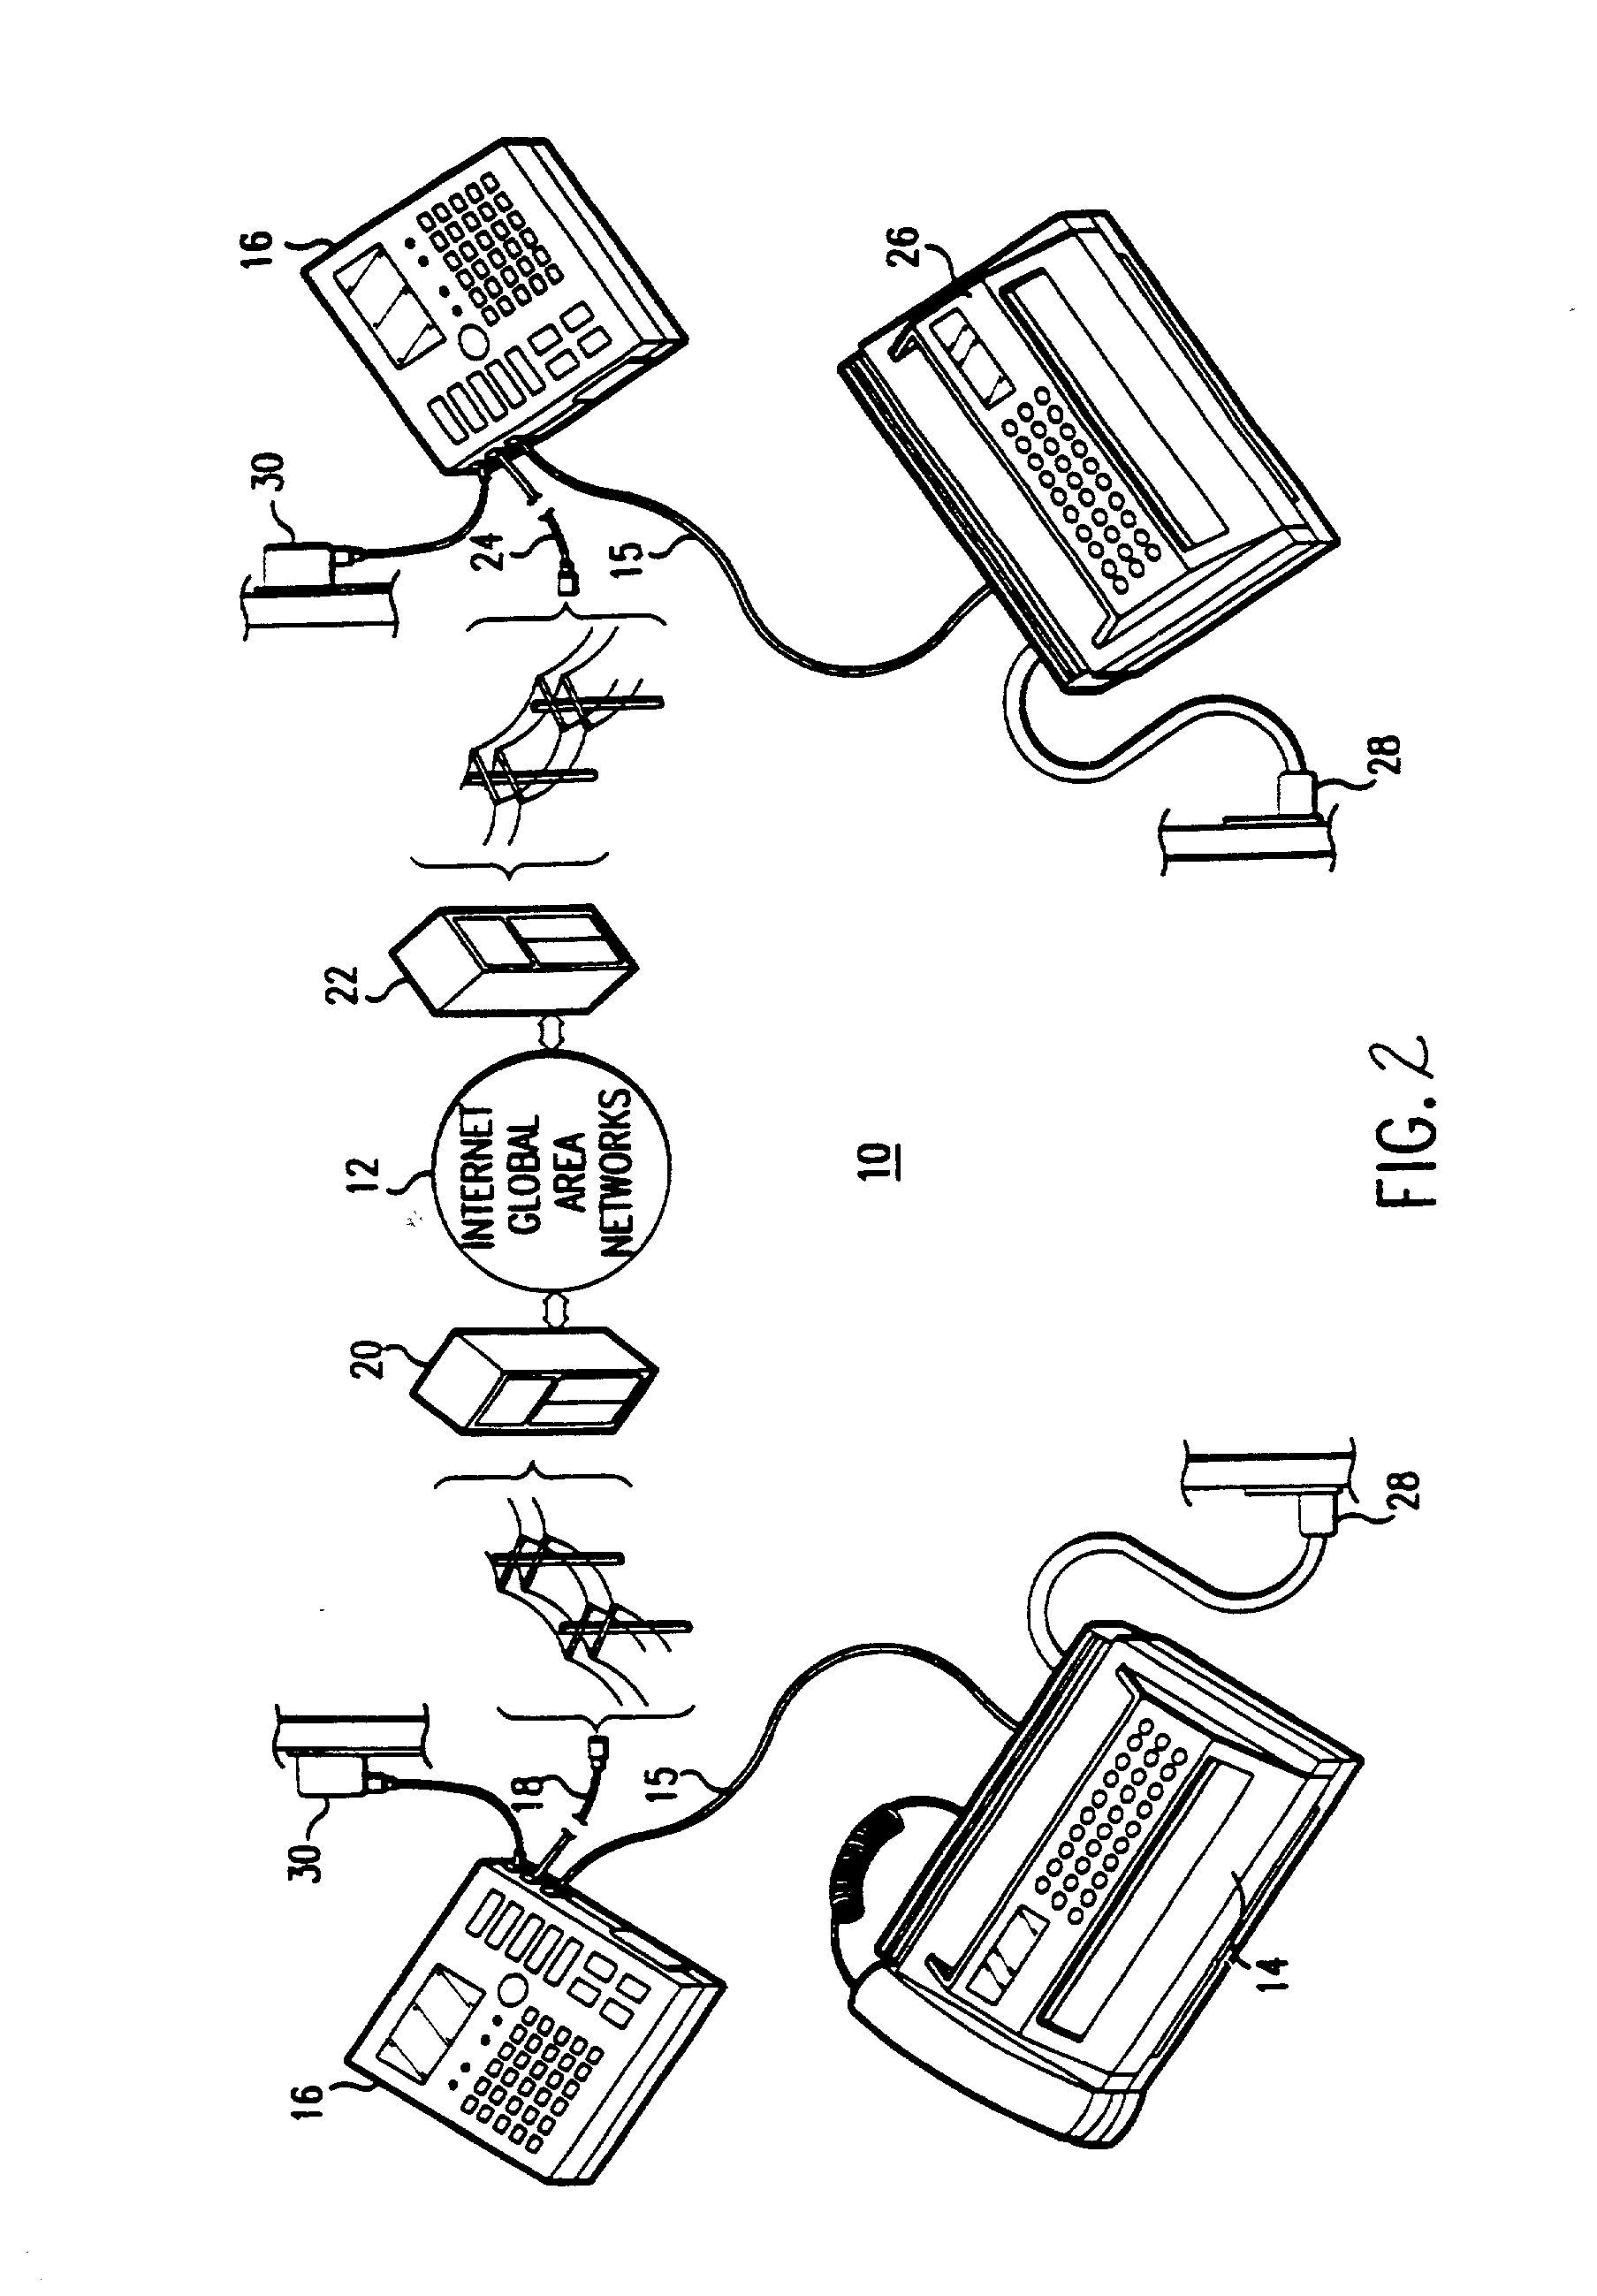 Method and apparatus for delivery of facsimile documents over a computer network